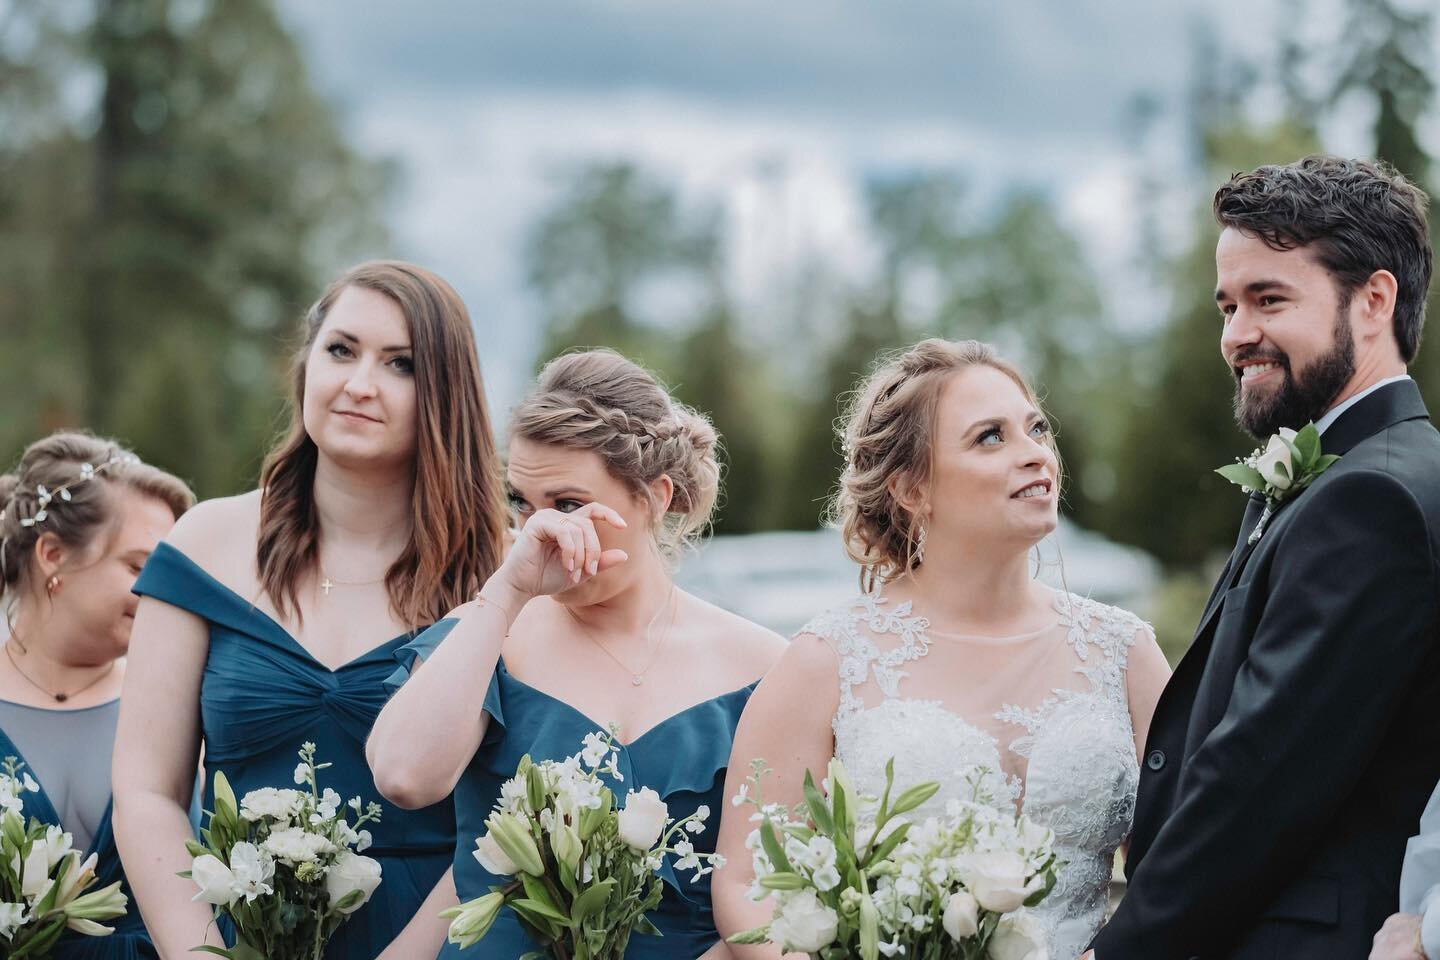 One of the best things about being a secondary photographer at a wedding is that you get to capture those different angles and those fun in-between moments! And even though we got rained and hailed on, it was still a really fun time!

#photography #p